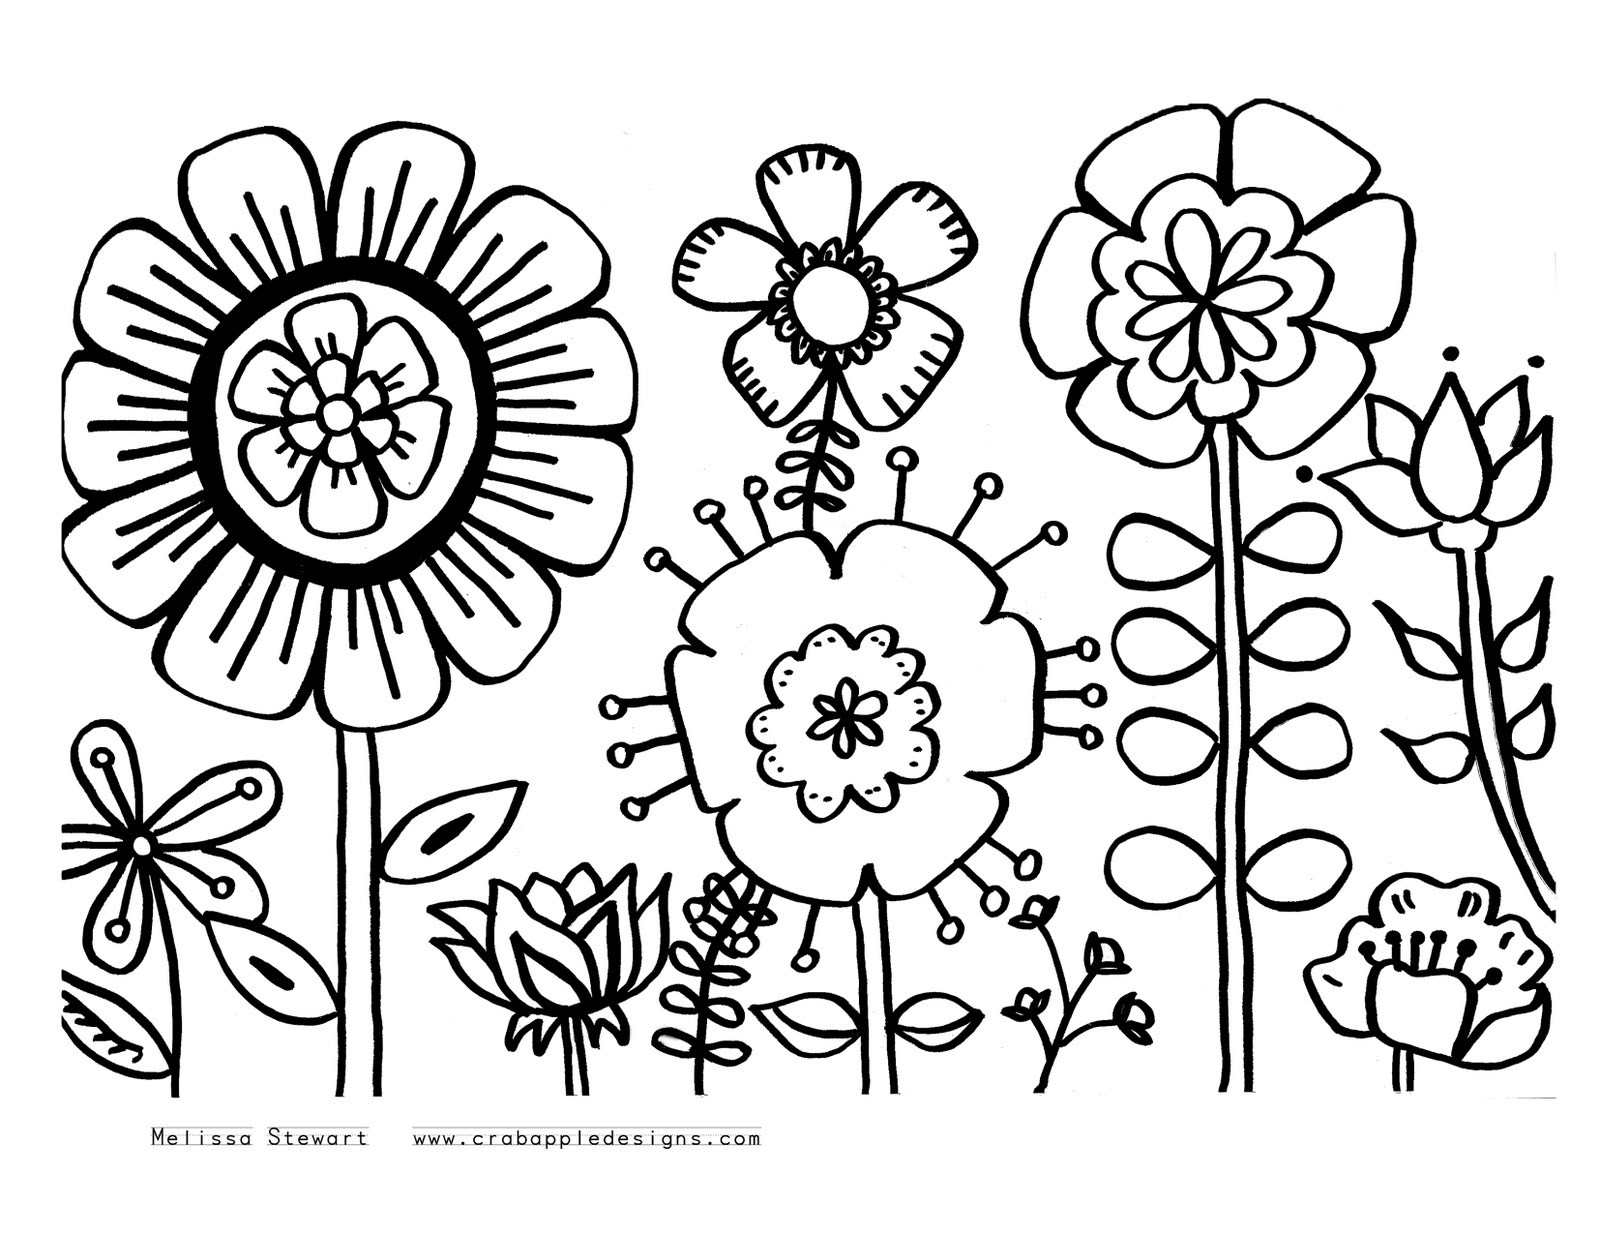 Printable Coloring Pages Flowers and butterflies